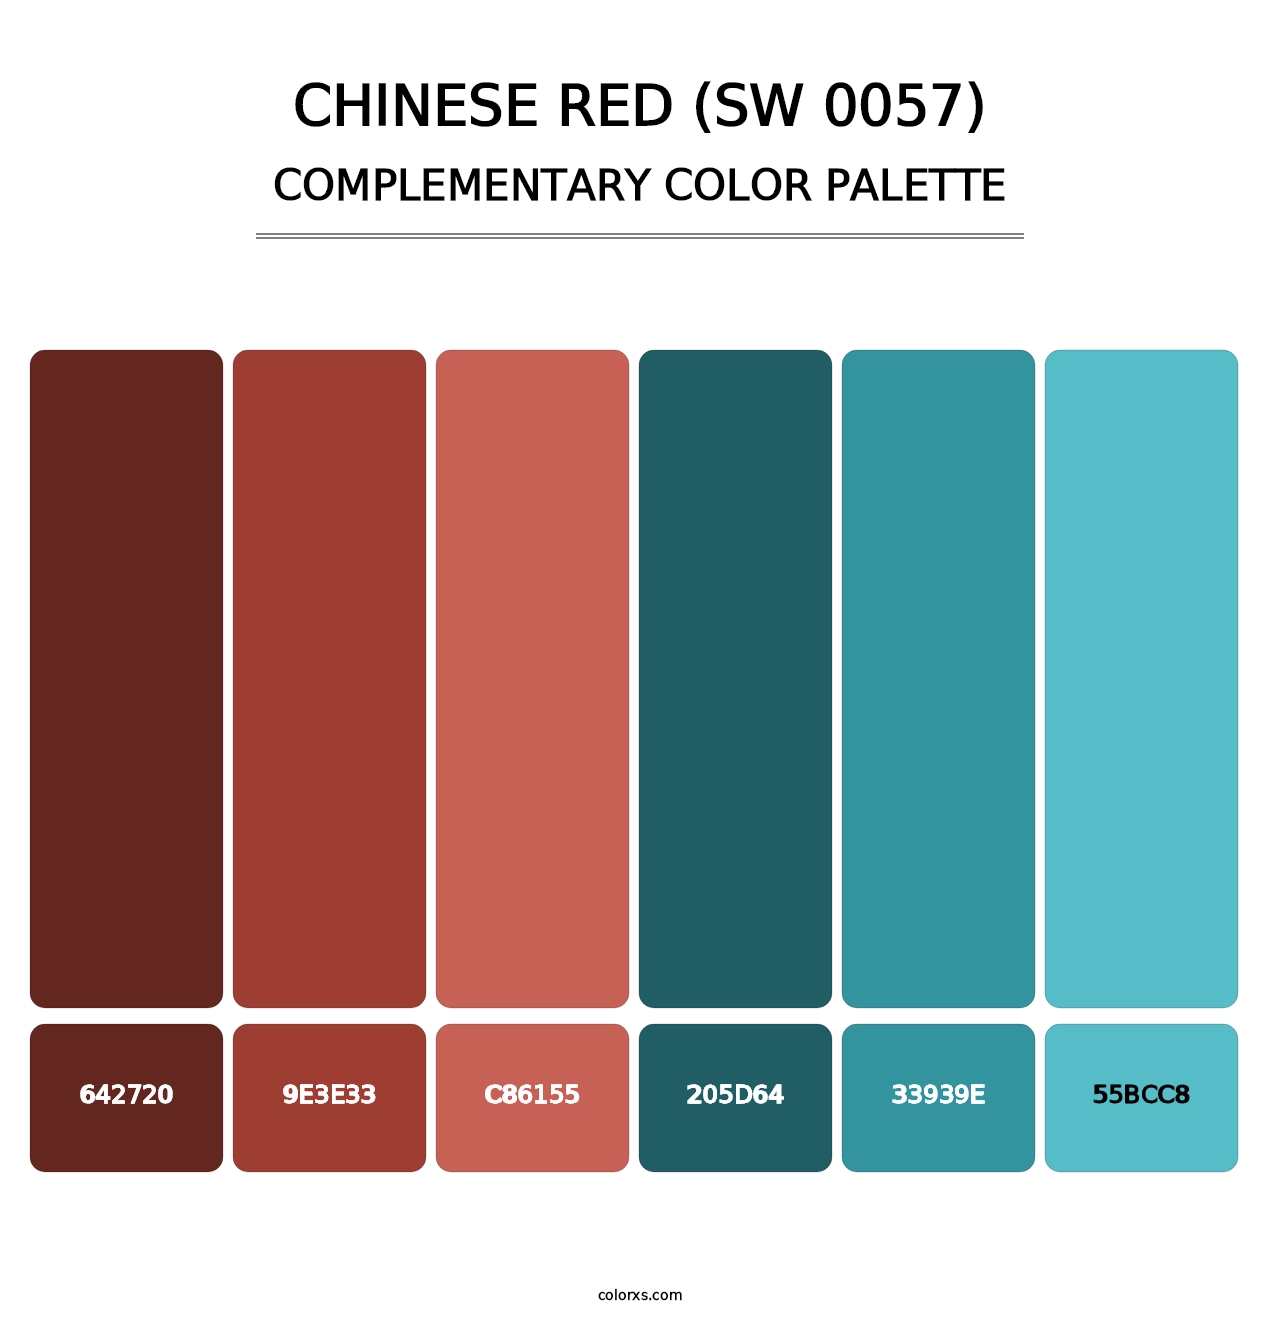 Chinese Red (SW 0057) - Complementary Color Palette